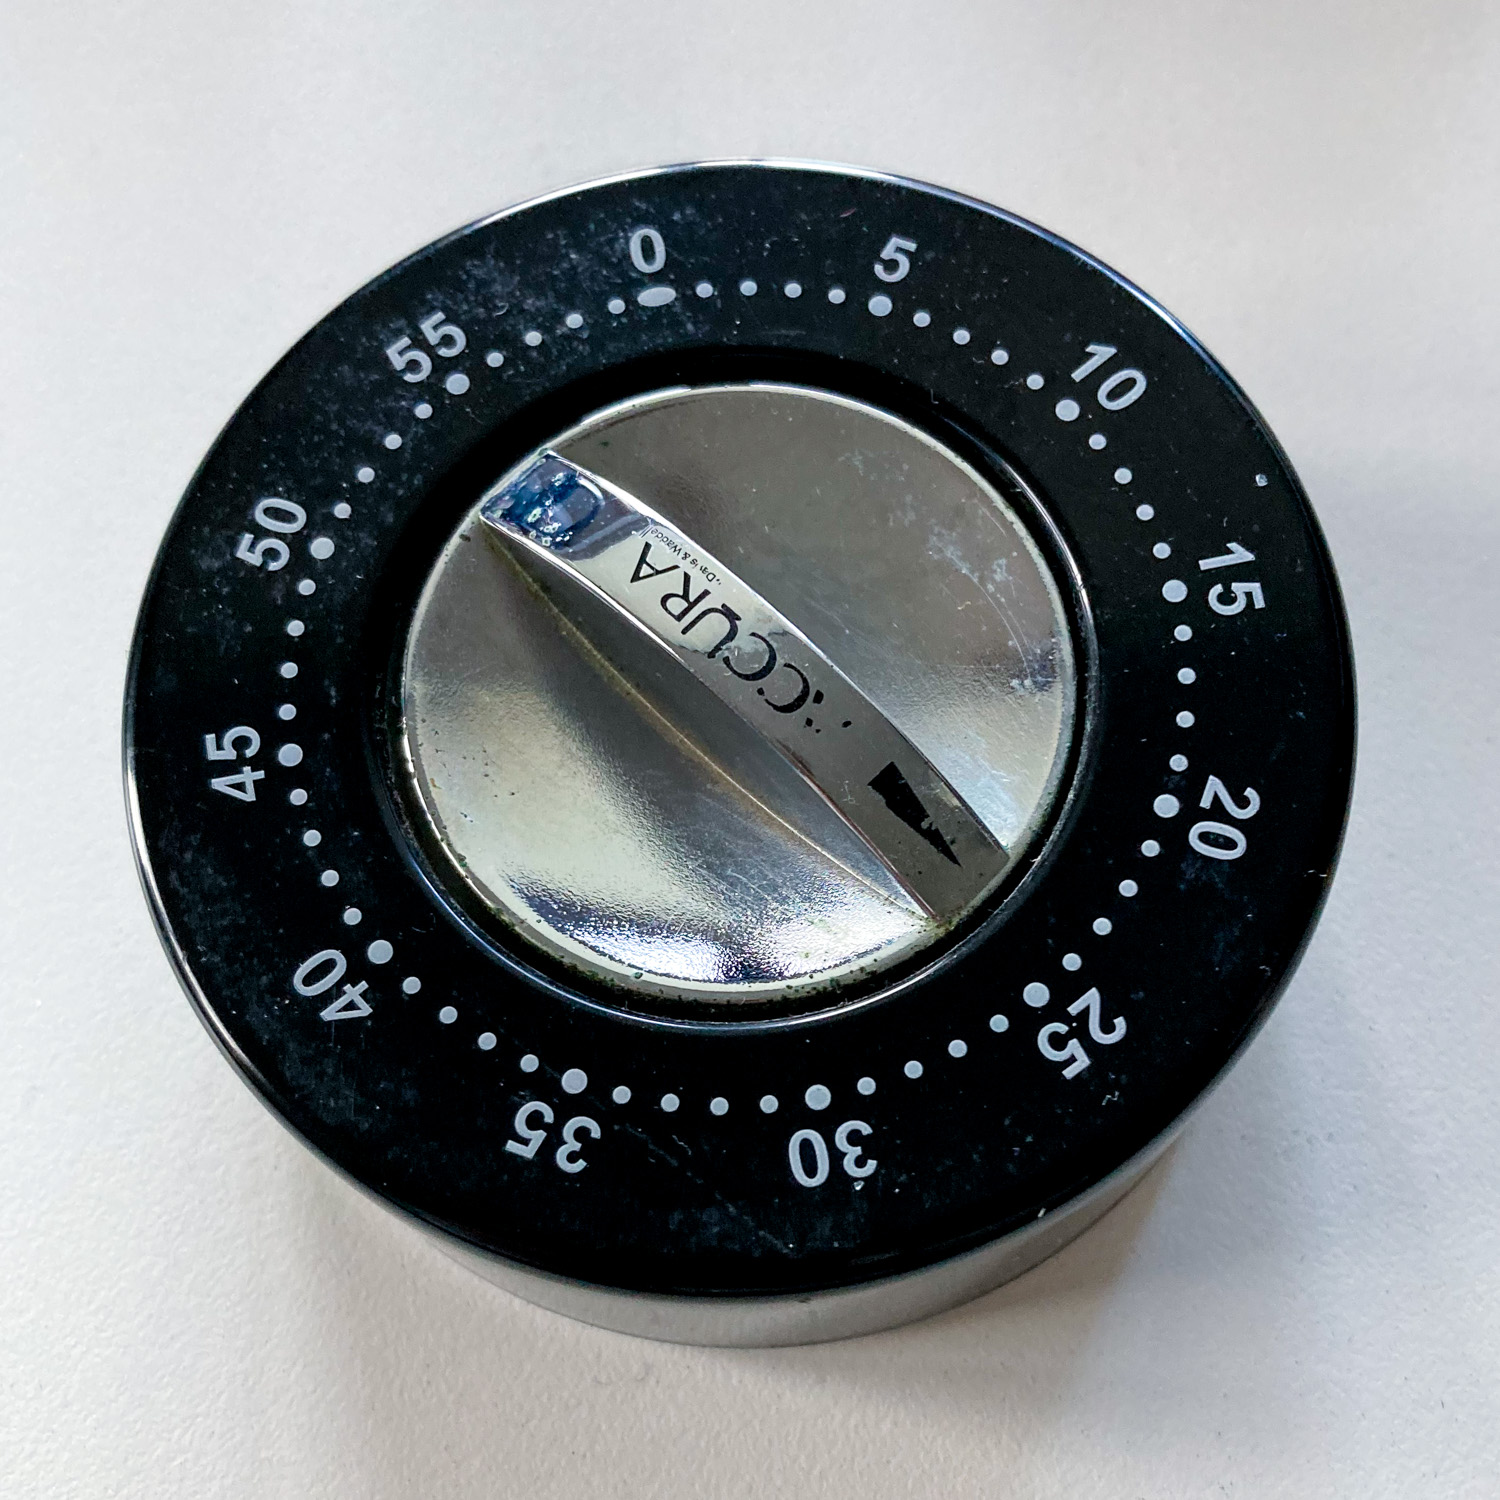 A circular kitchen timer with a black face and silver dial